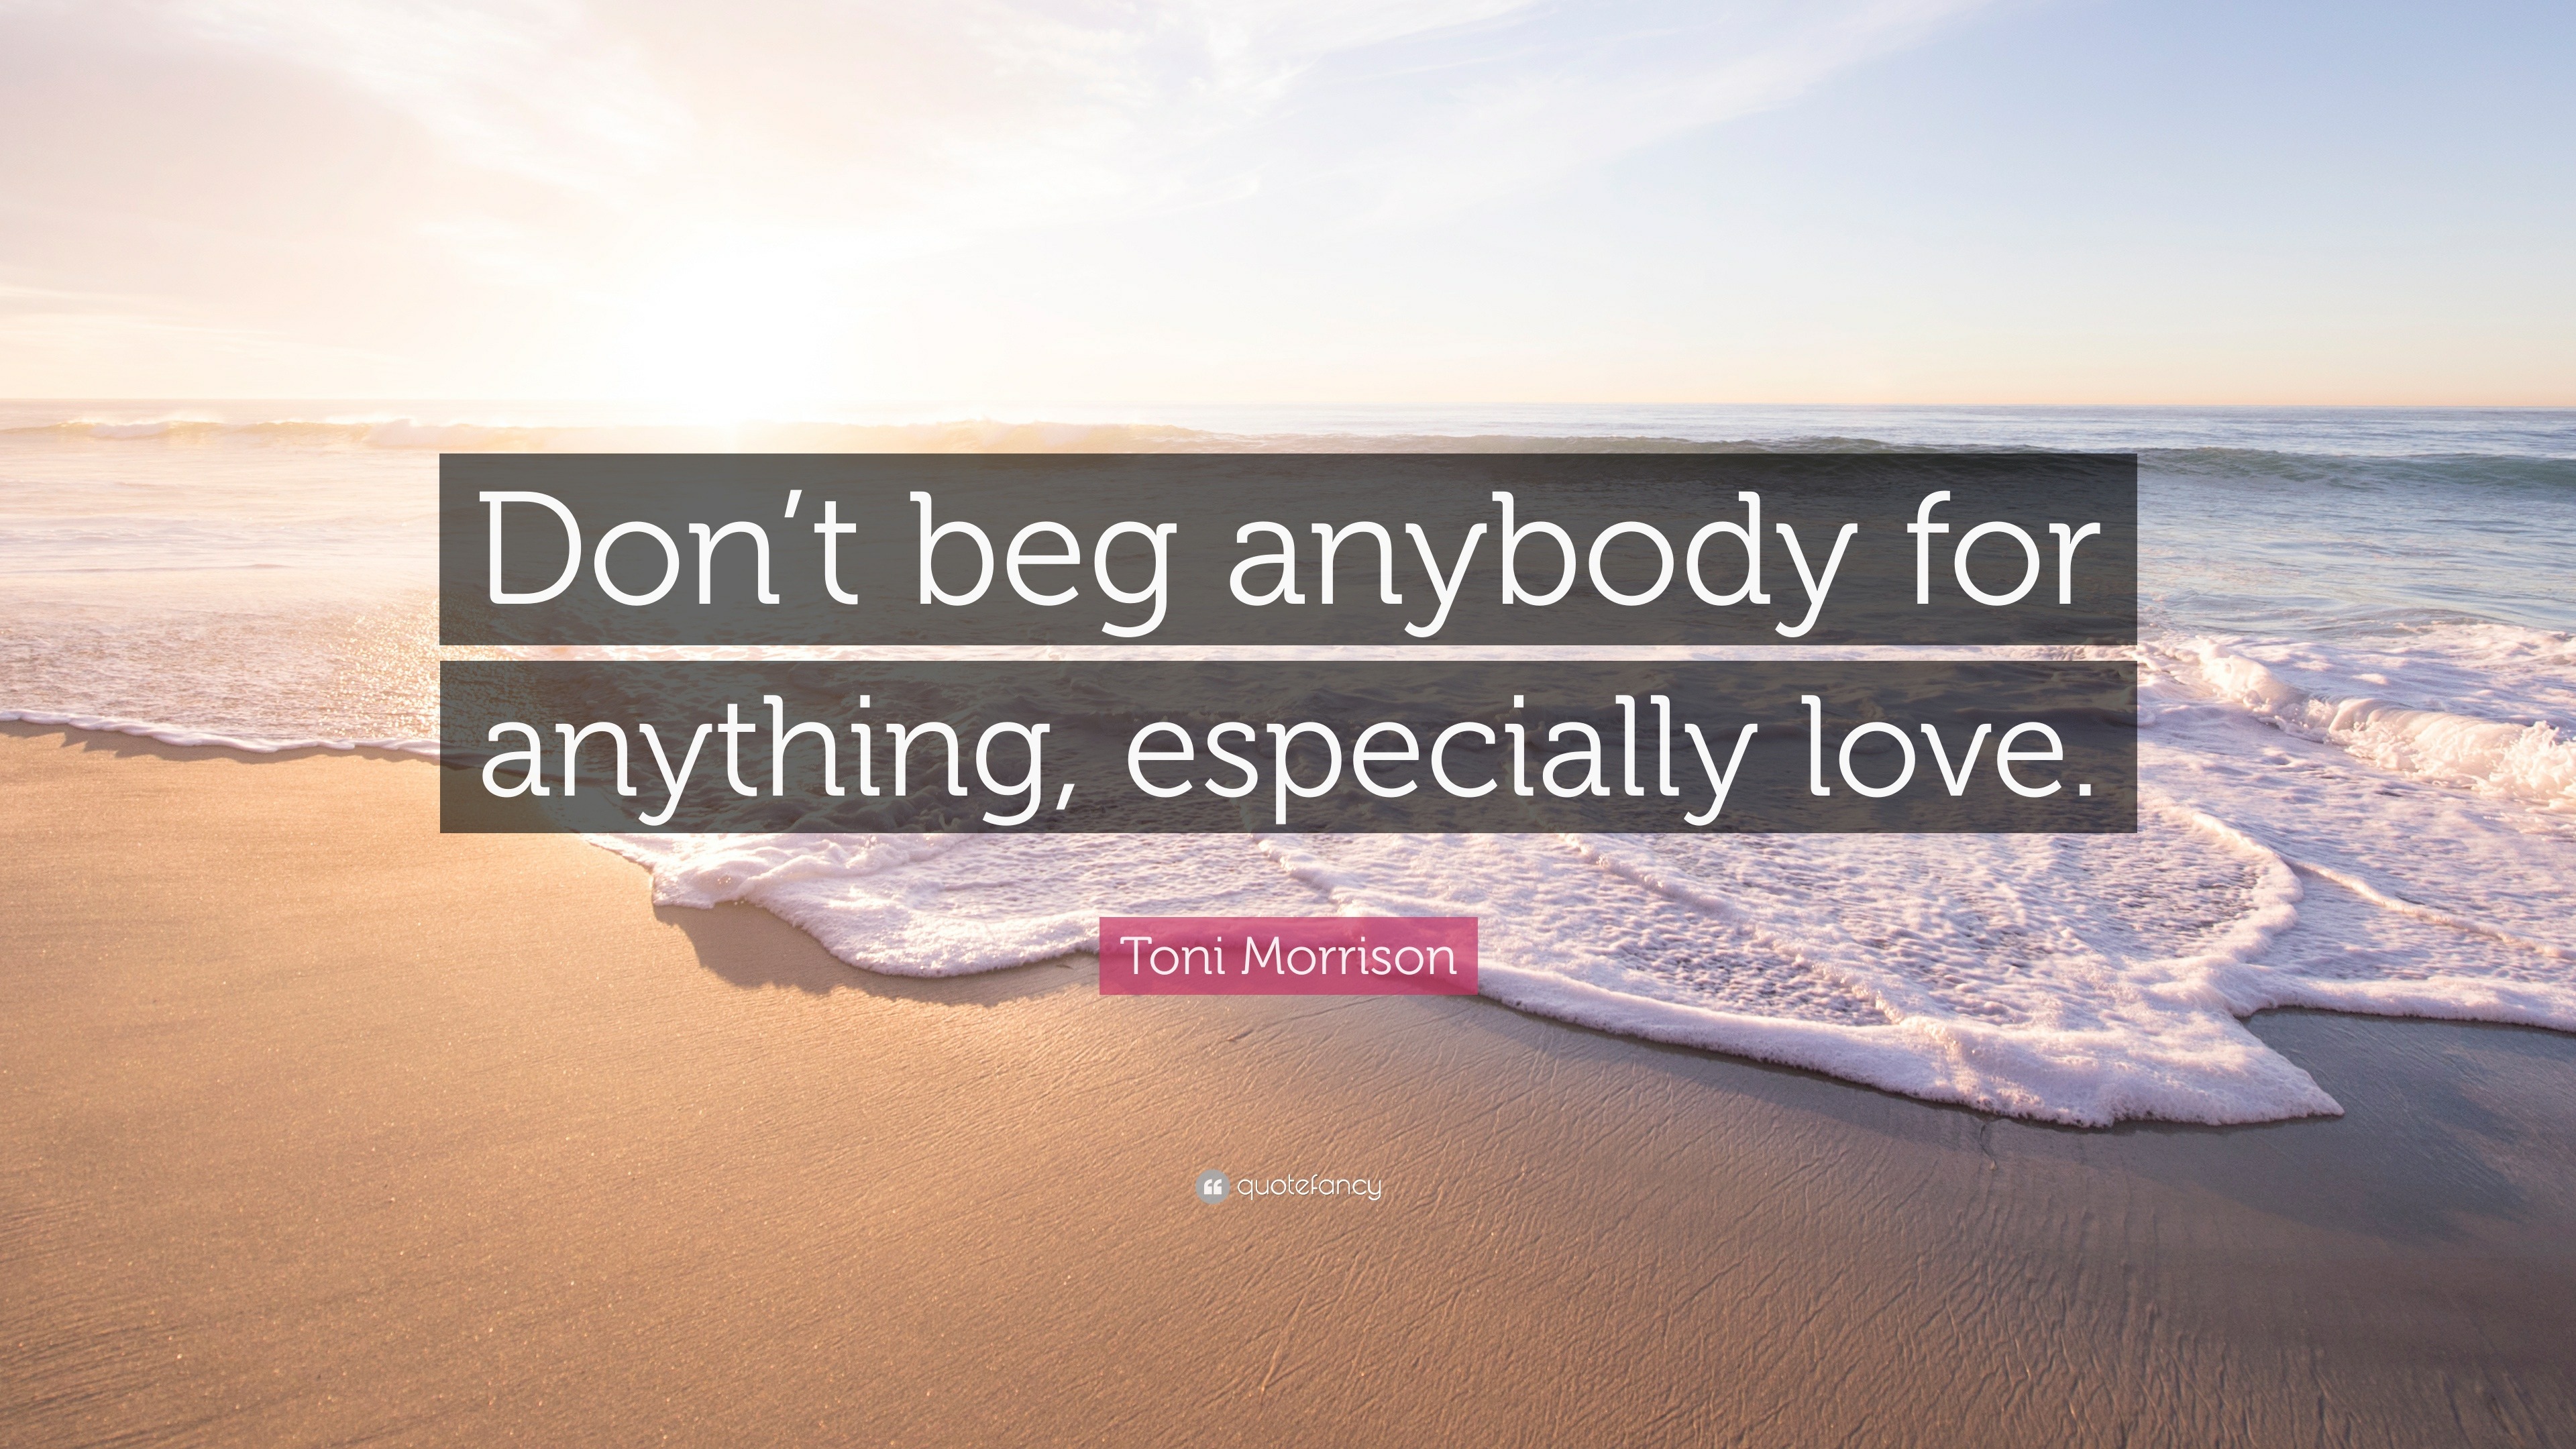 Toni Morrison Quote “Don t beg anybody for anything especially love